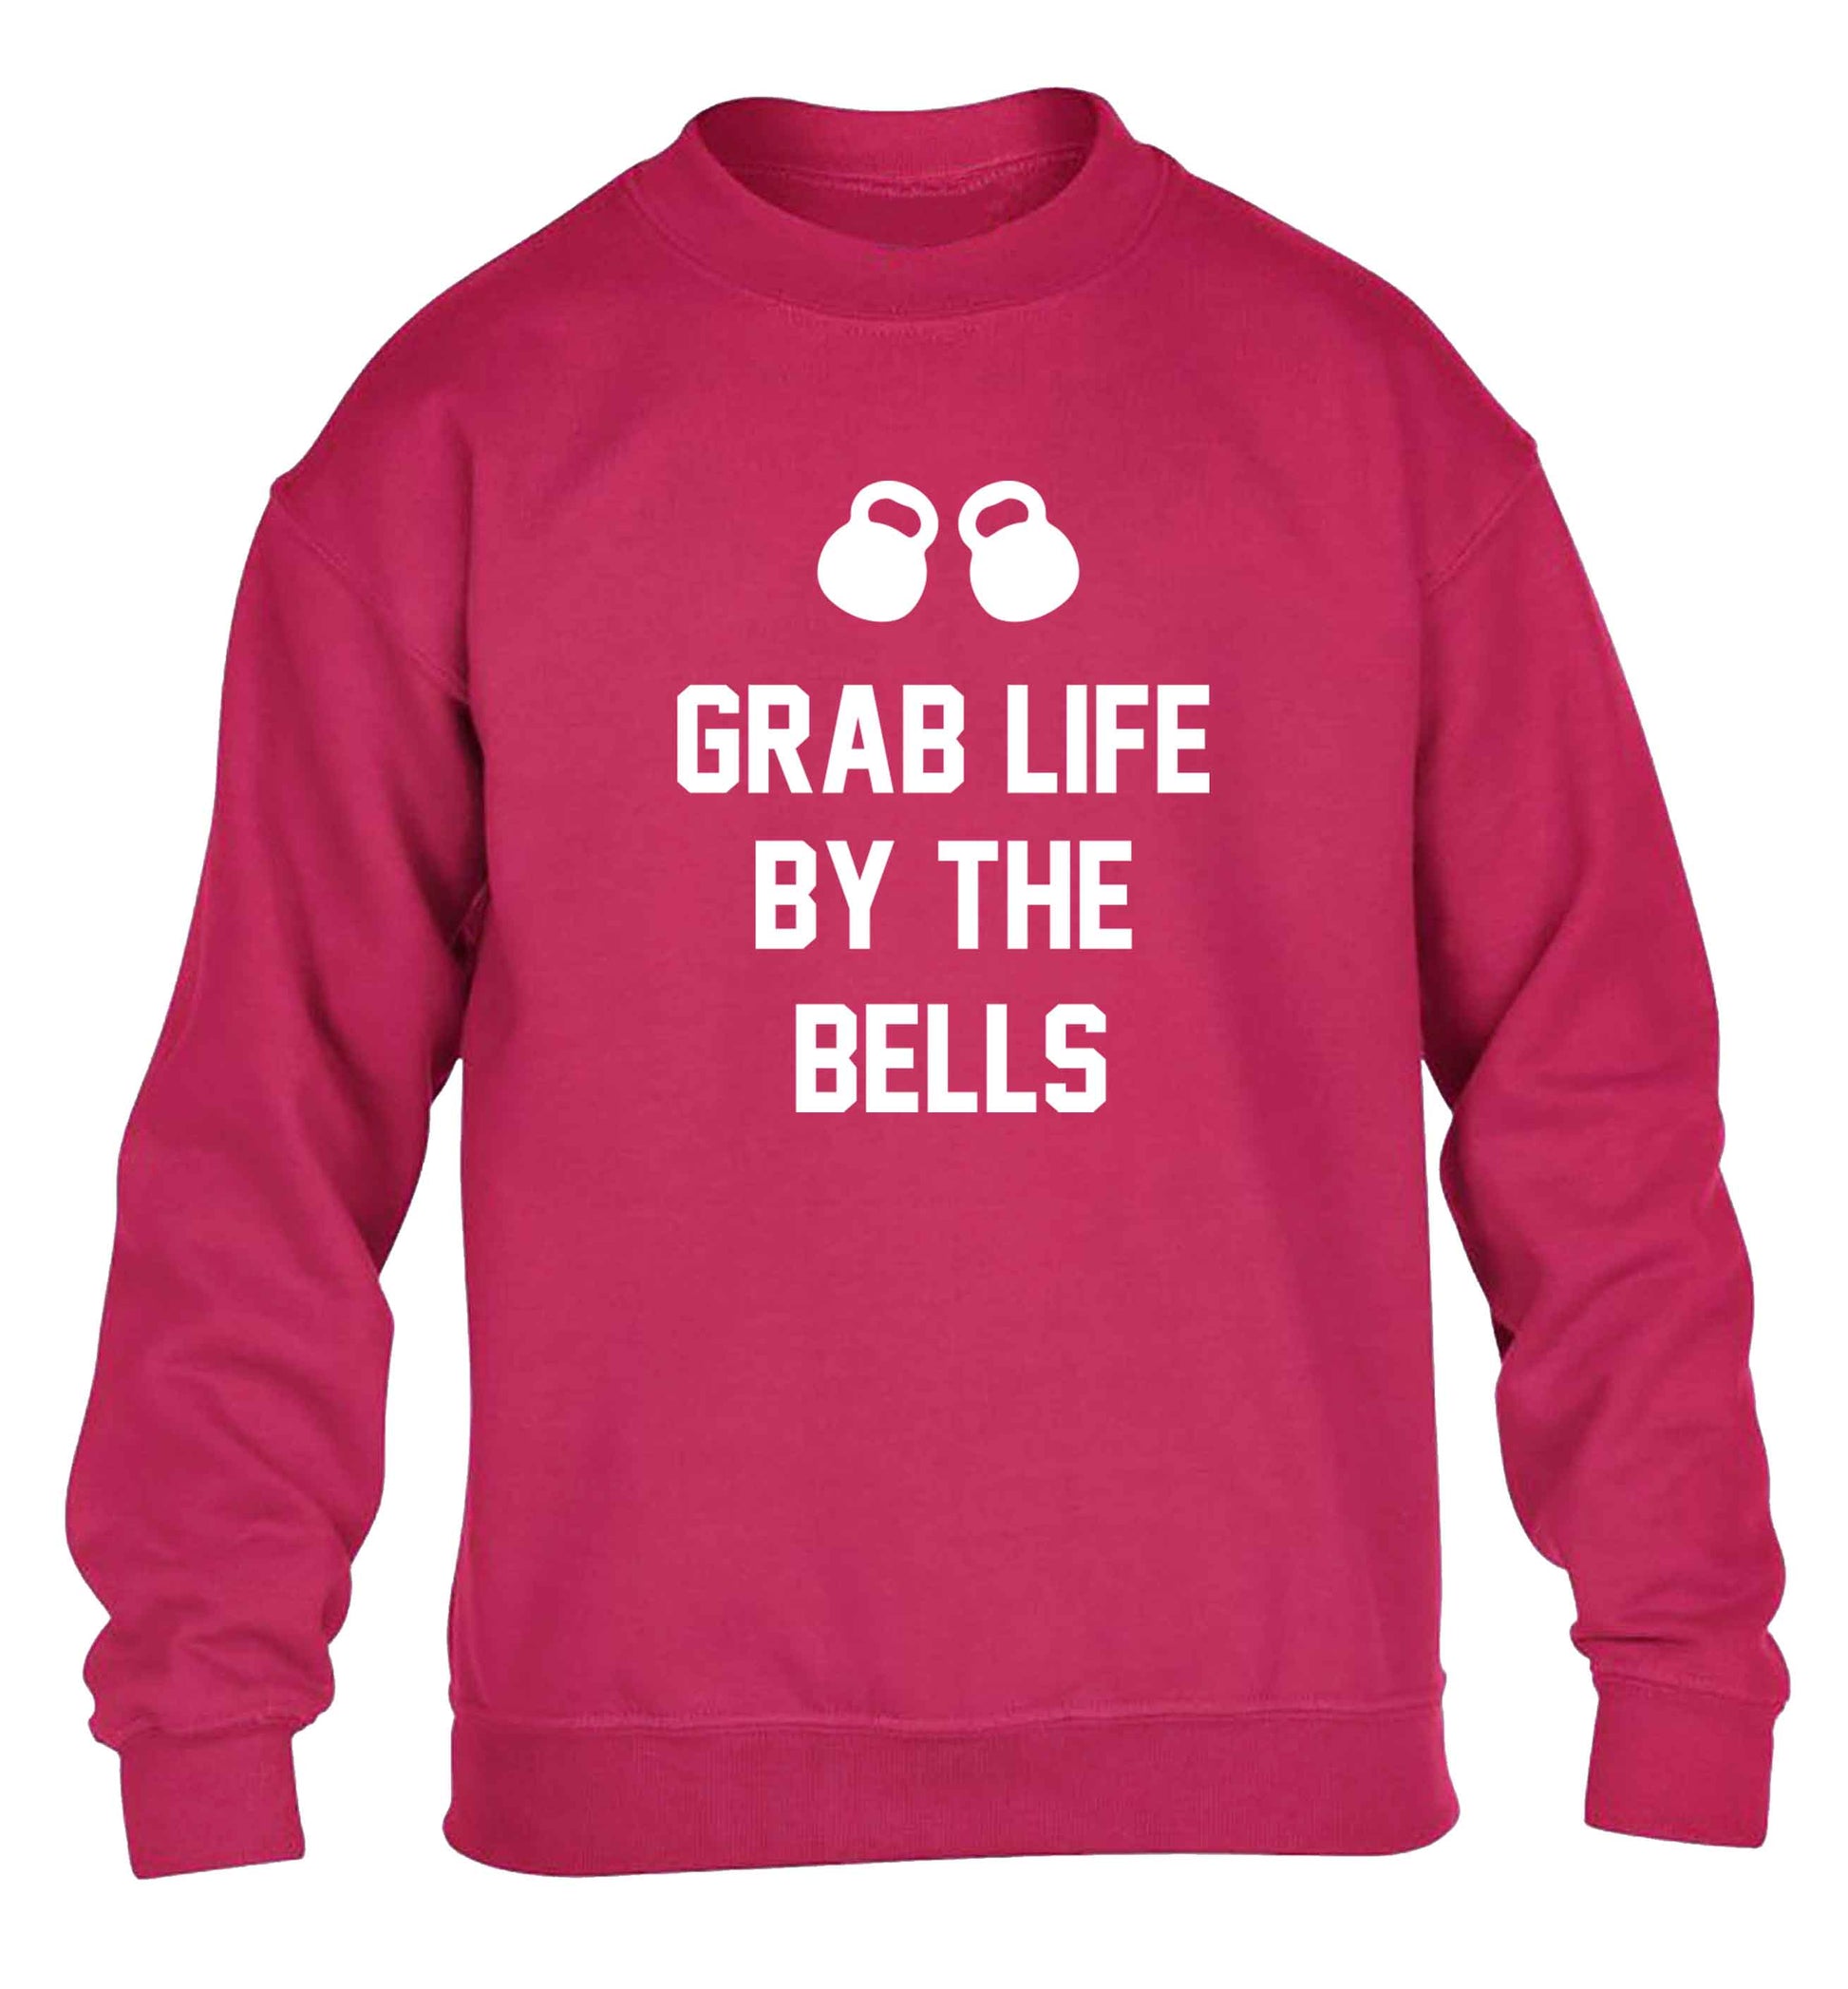 Grab life by the bells children's pink sweater 12-13 Years